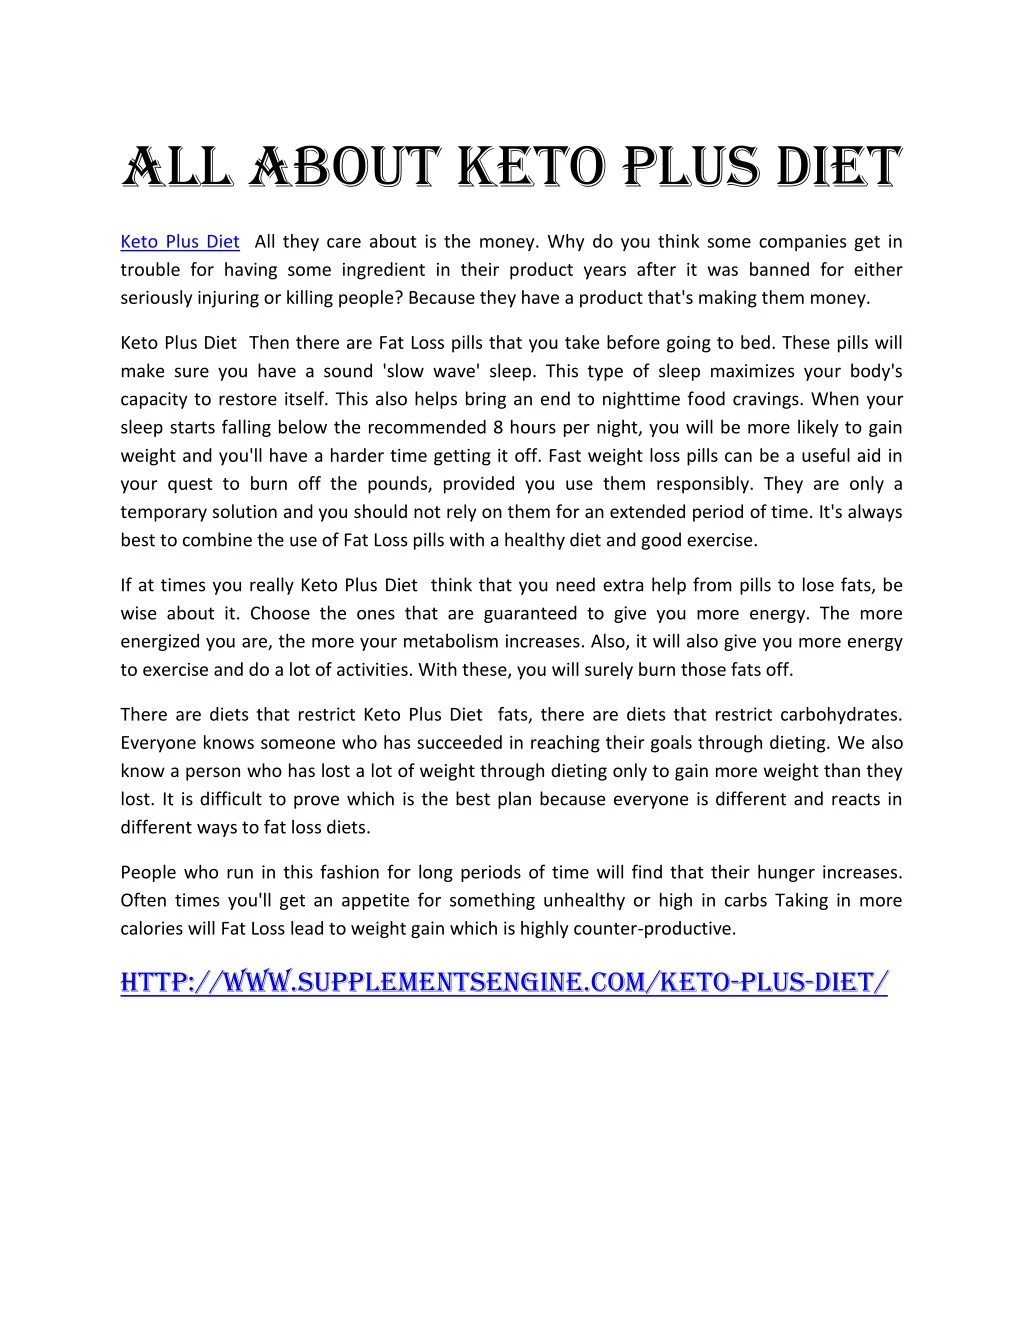 all about keto plus diet